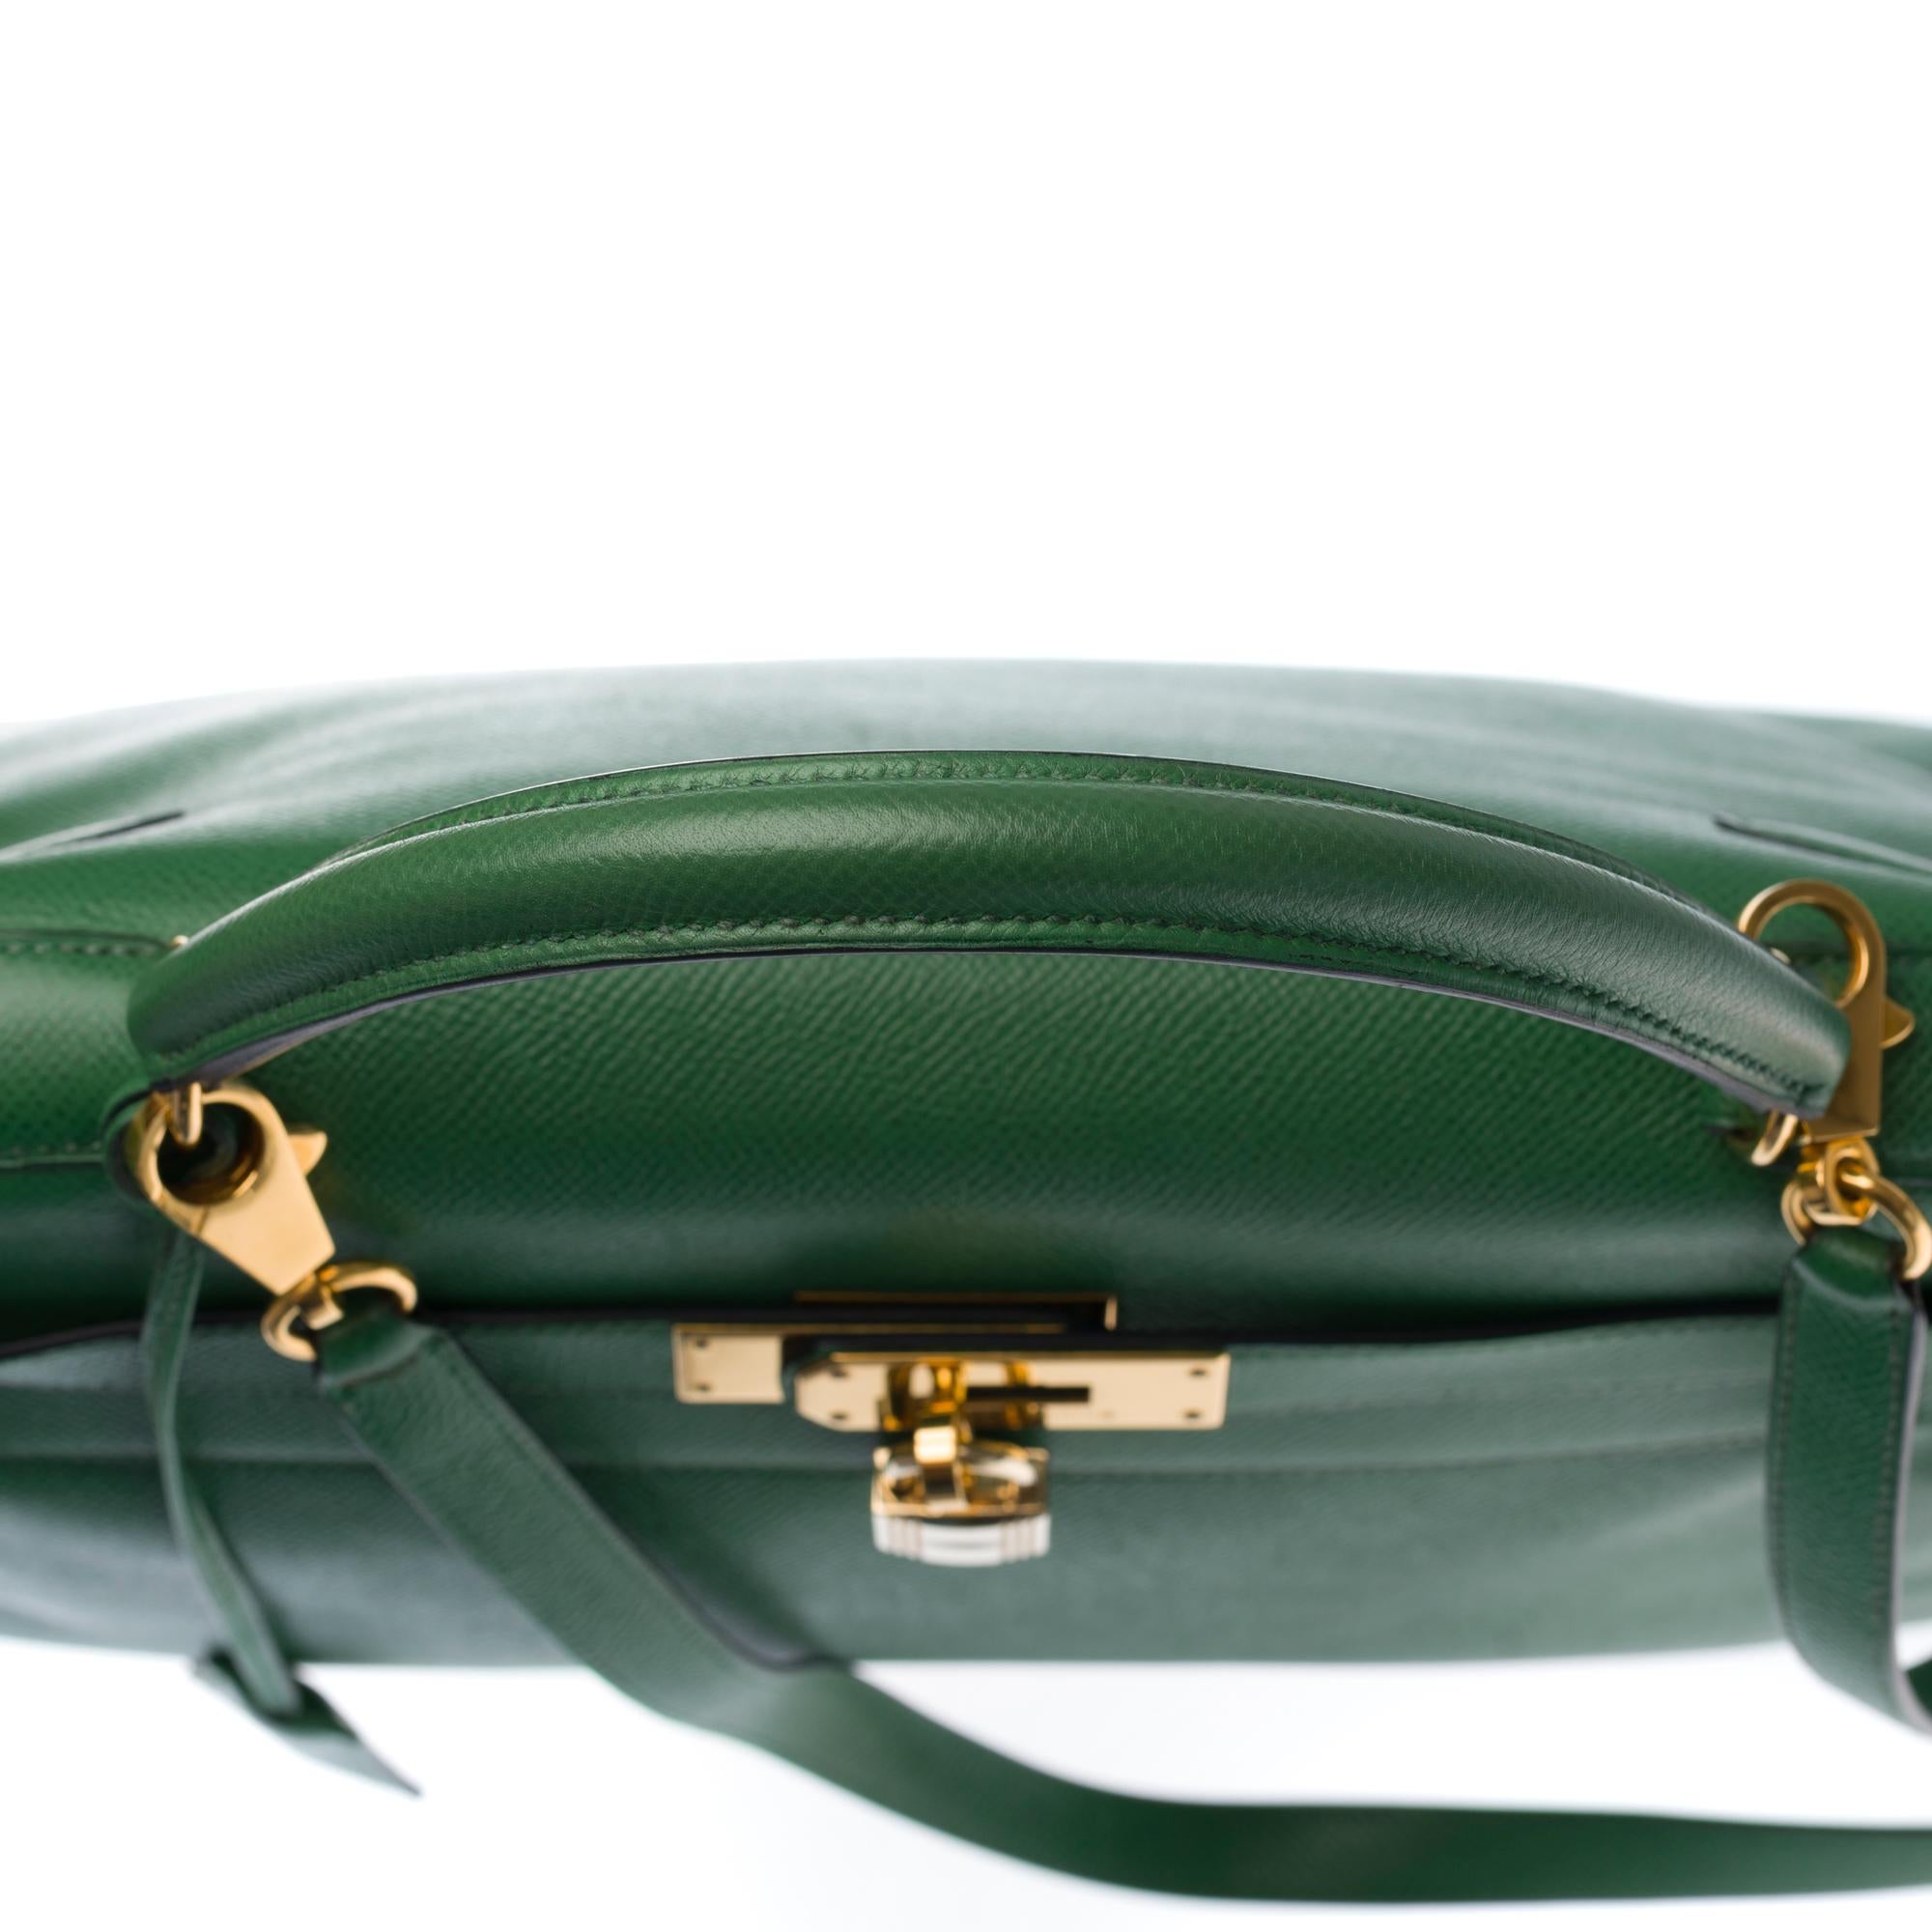 RARE Hermès Kelly 32 handbag with strap in green courchevel and gold hardware 3